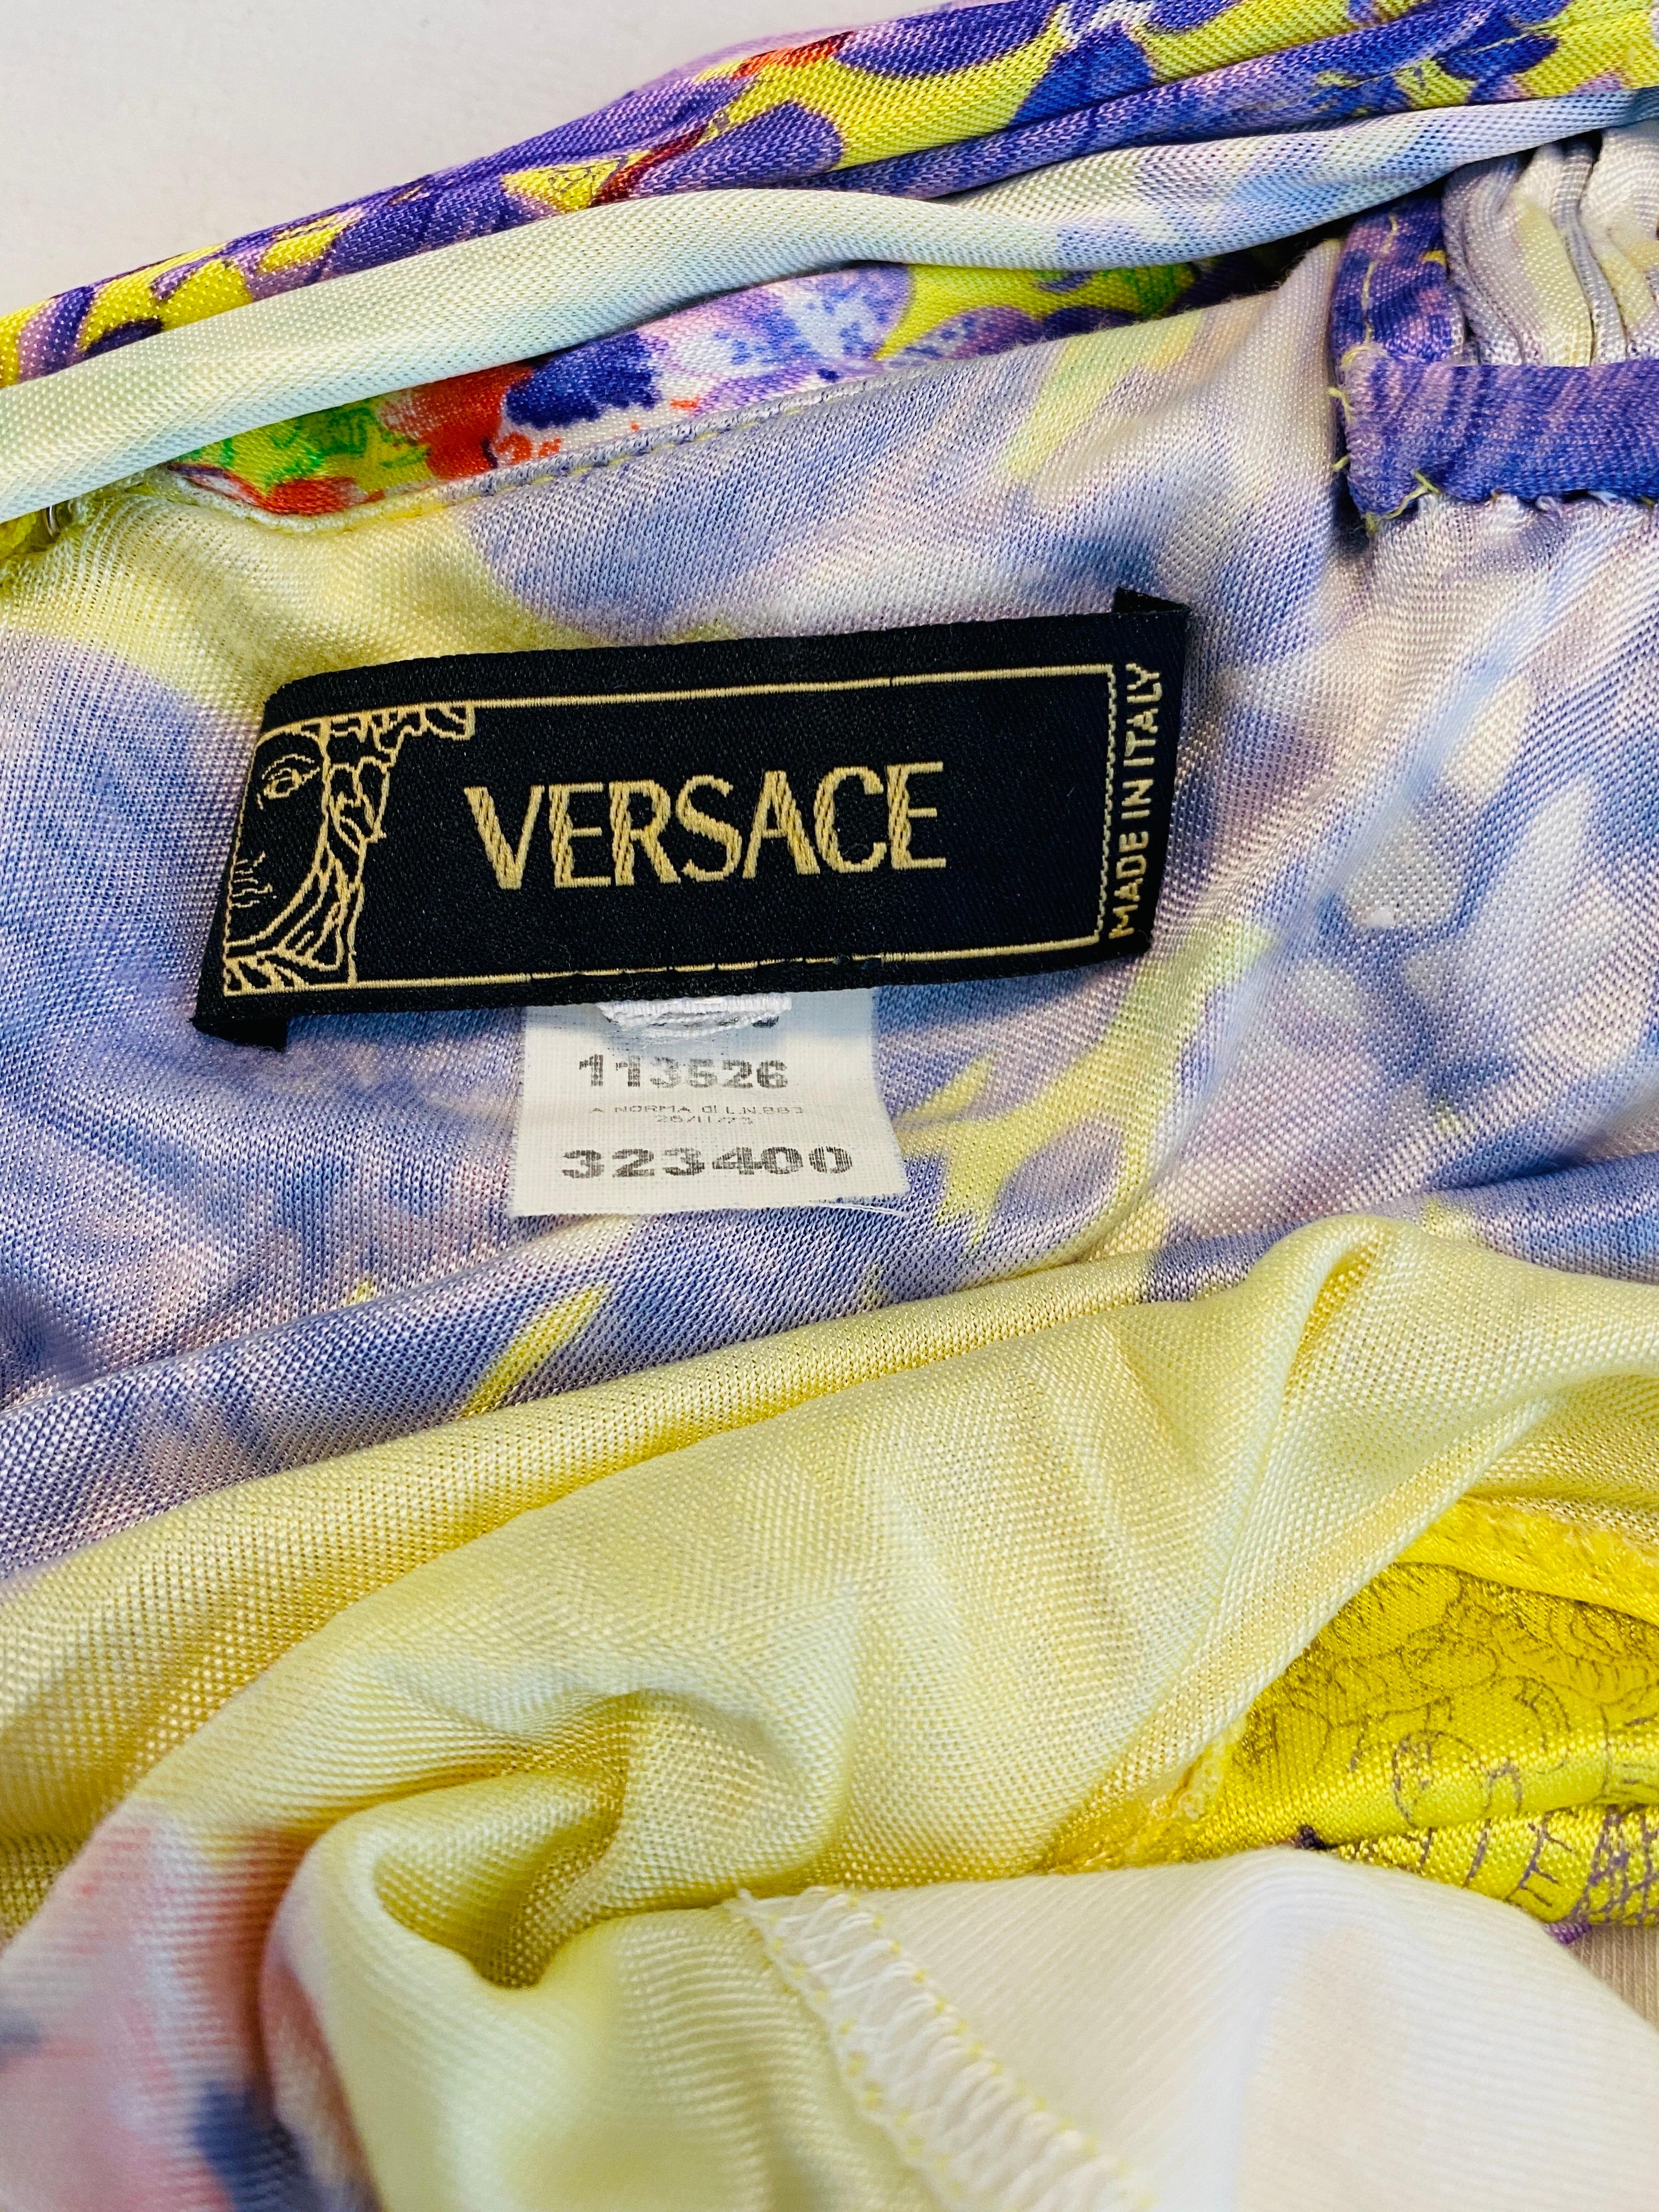 Vintage S/S 2004 Versace Dress Bright Yellow + Purple Orchid Floral Runway For Sale 12